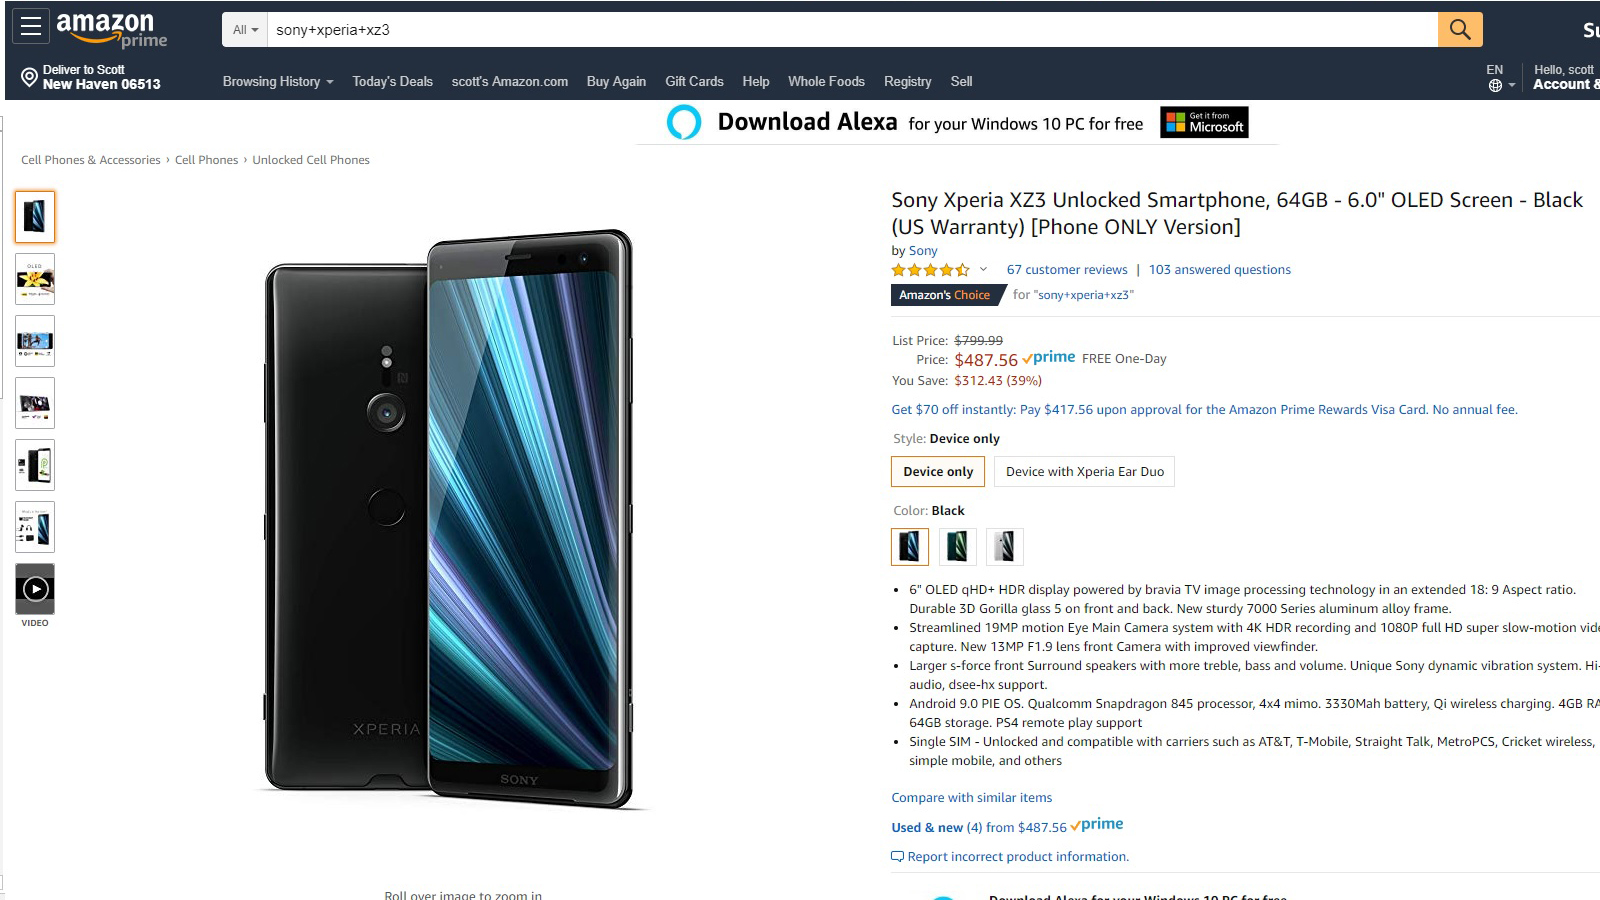 A deal page for the Sony Xperia XZ3.